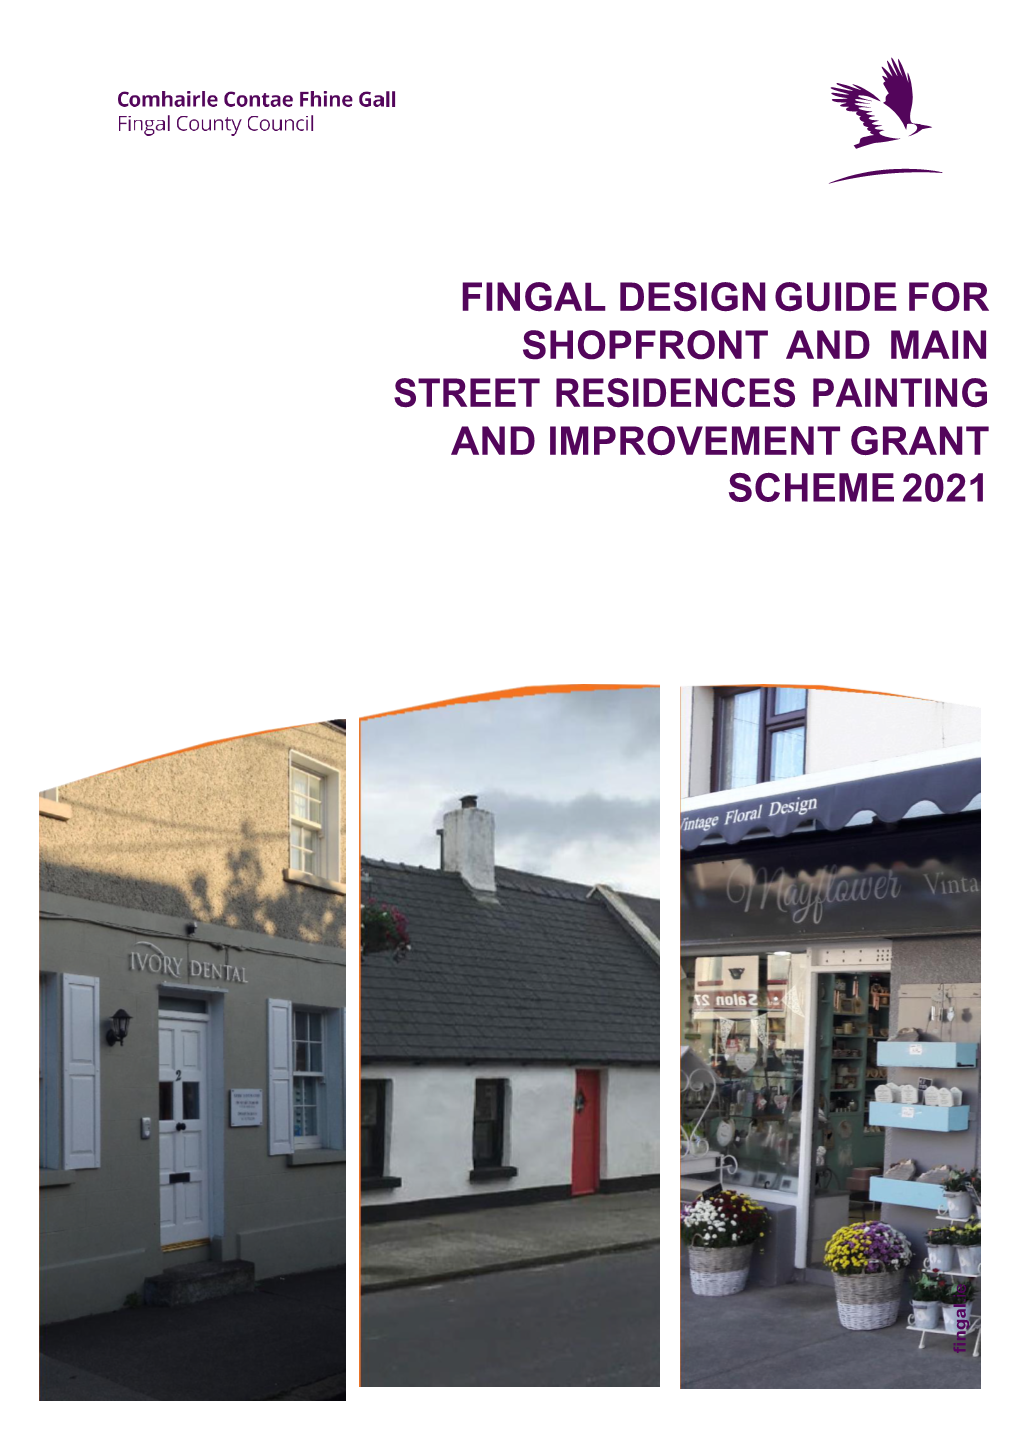 Fingal Design Guide for Shopfront and Main Street Residences Painting and Improvement Grant Scheme 2021